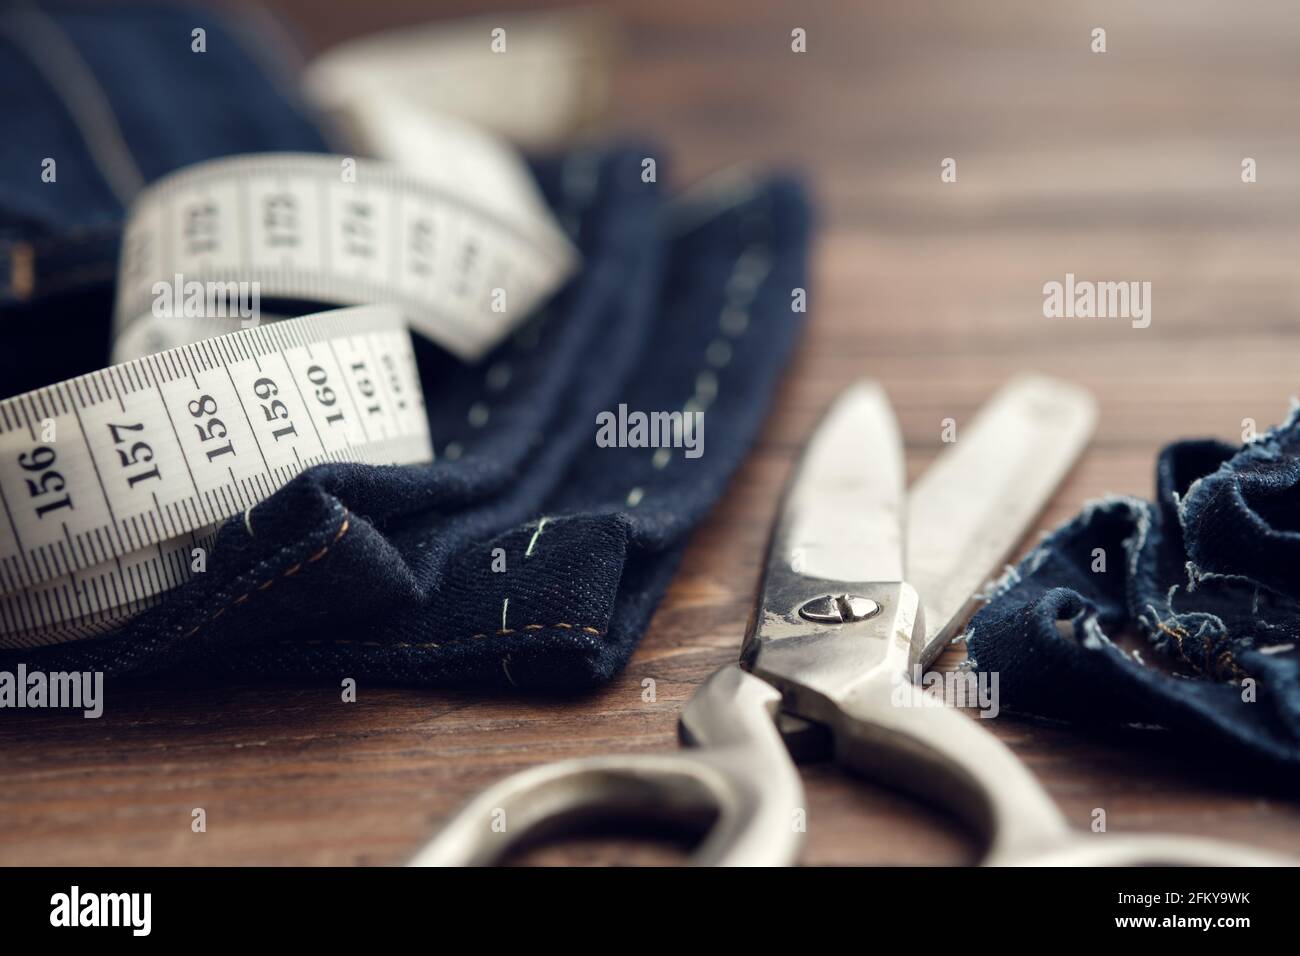 Shortening jeans. Measuring tape and tailoring scissors on table. Jeans cutting. Stock Photo